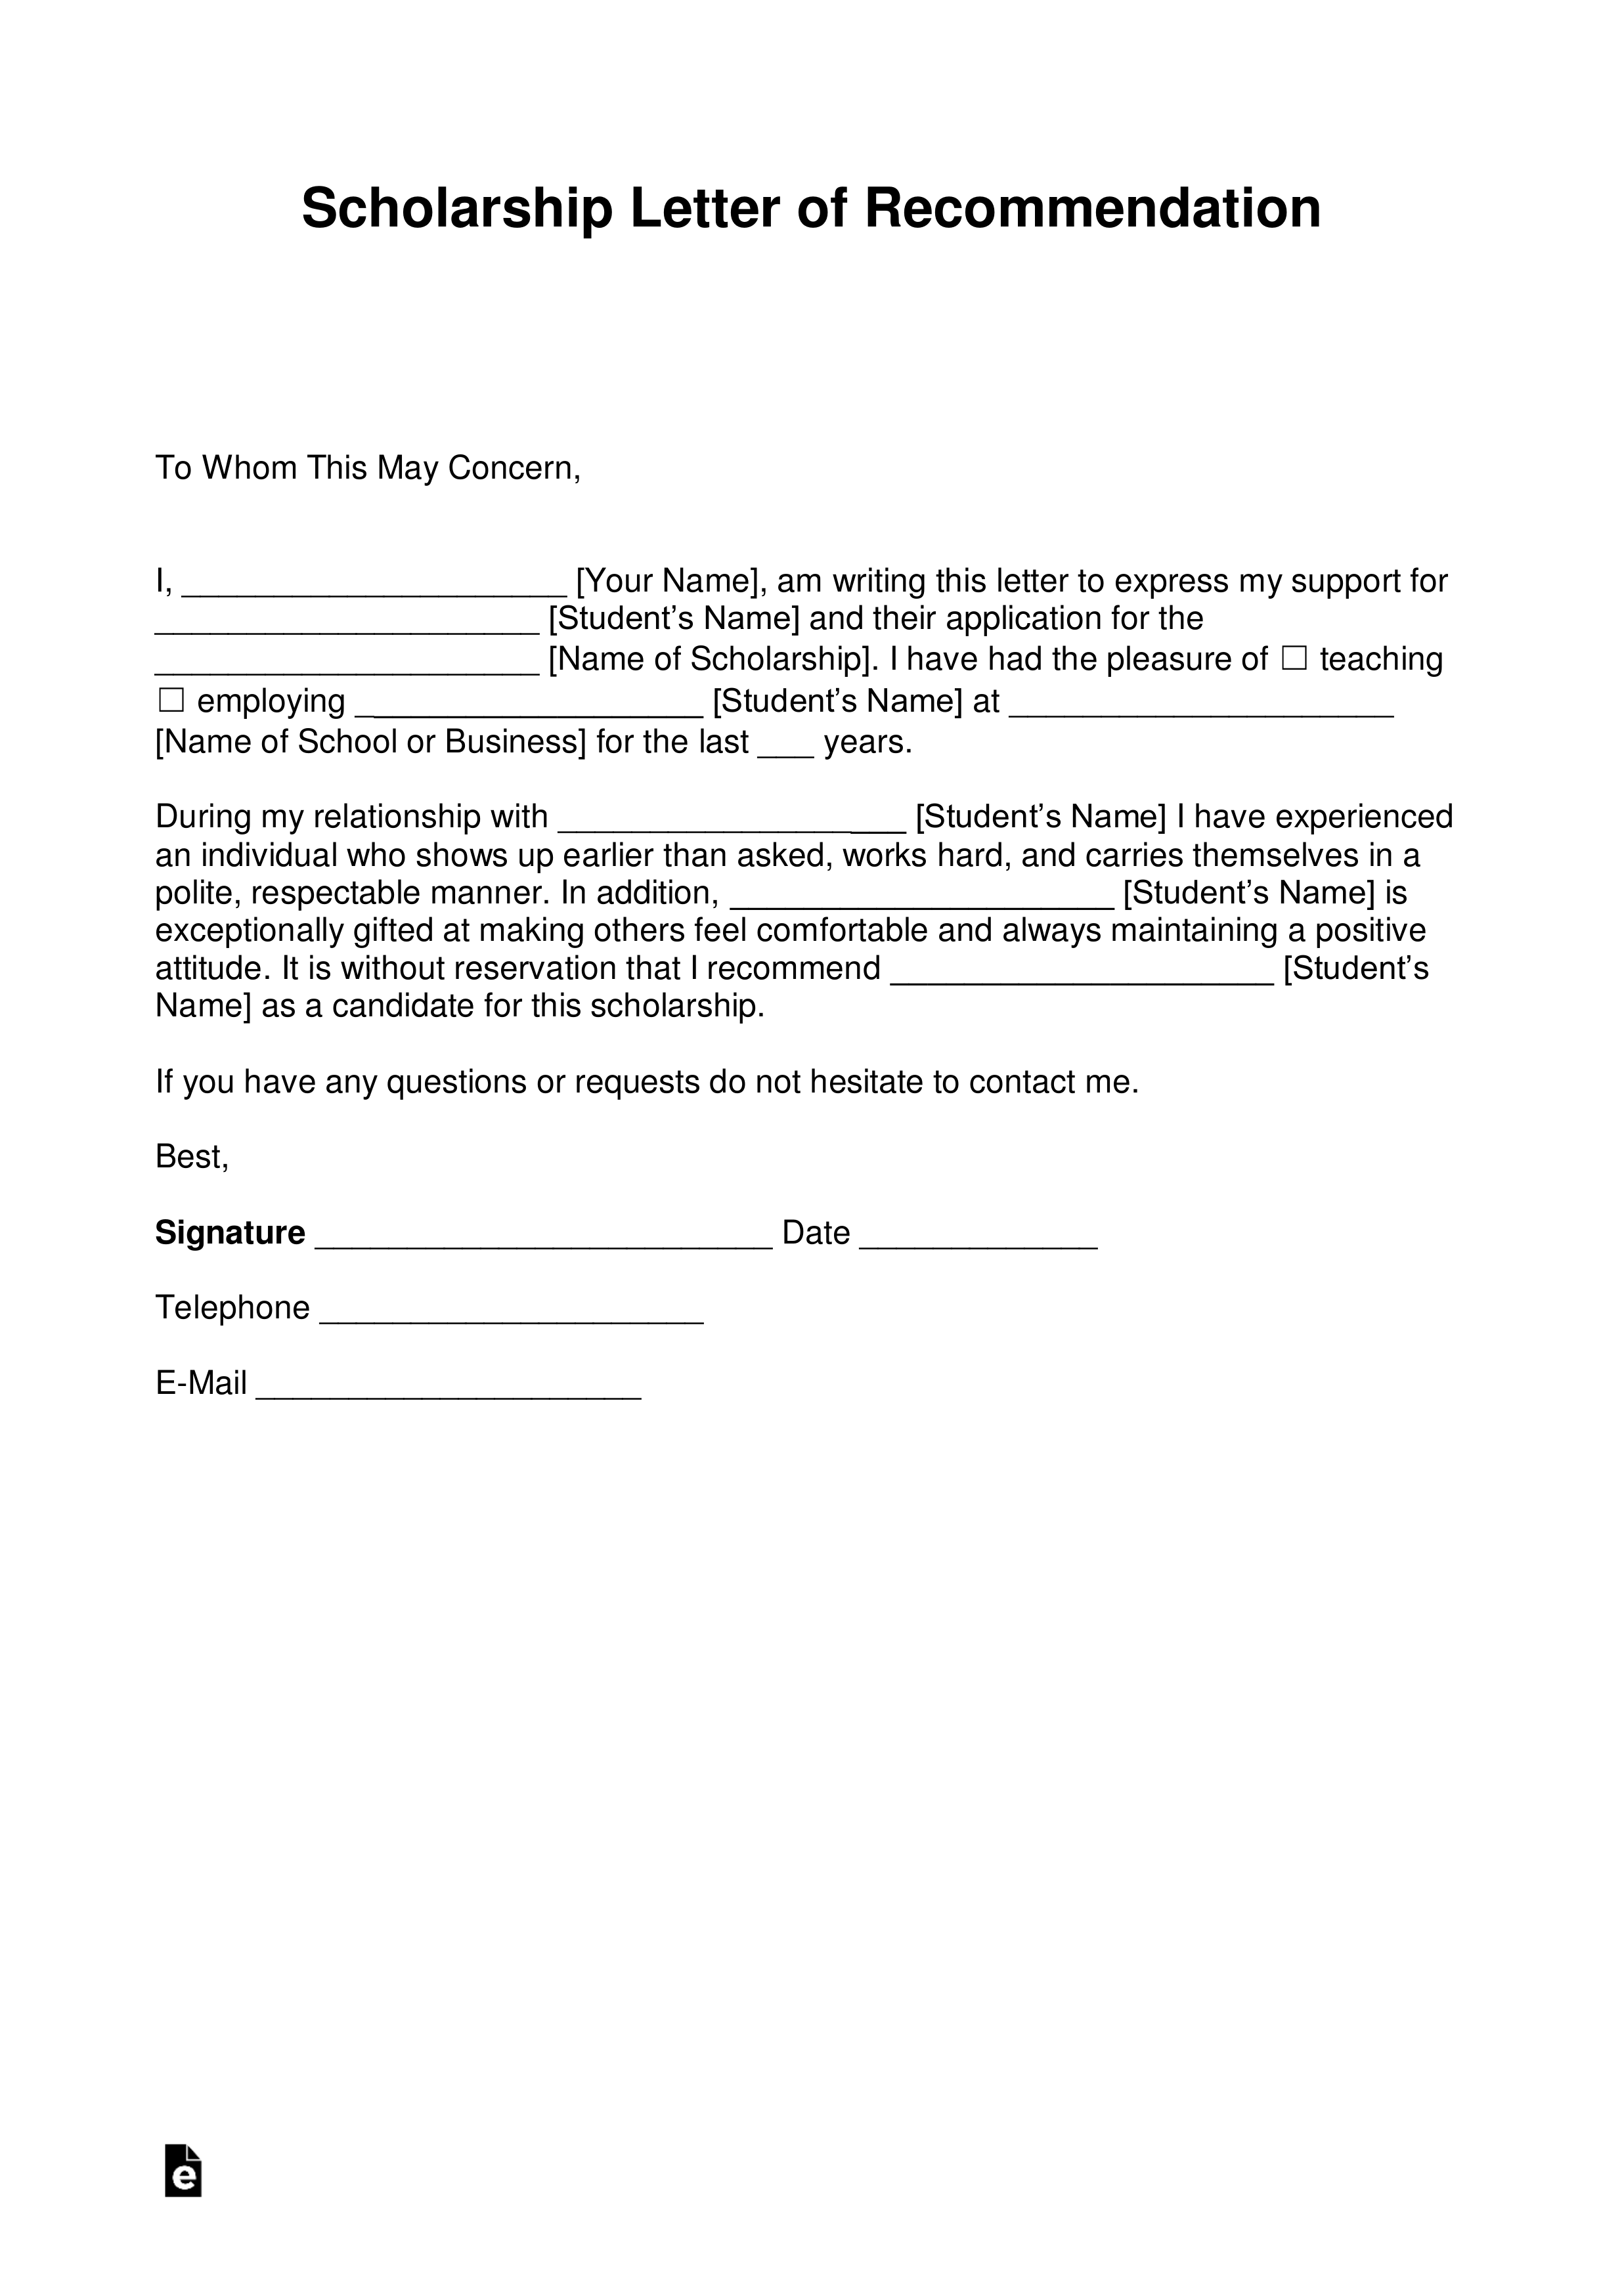 Example Of Recommendation Letter For Scholarship from eforms.com